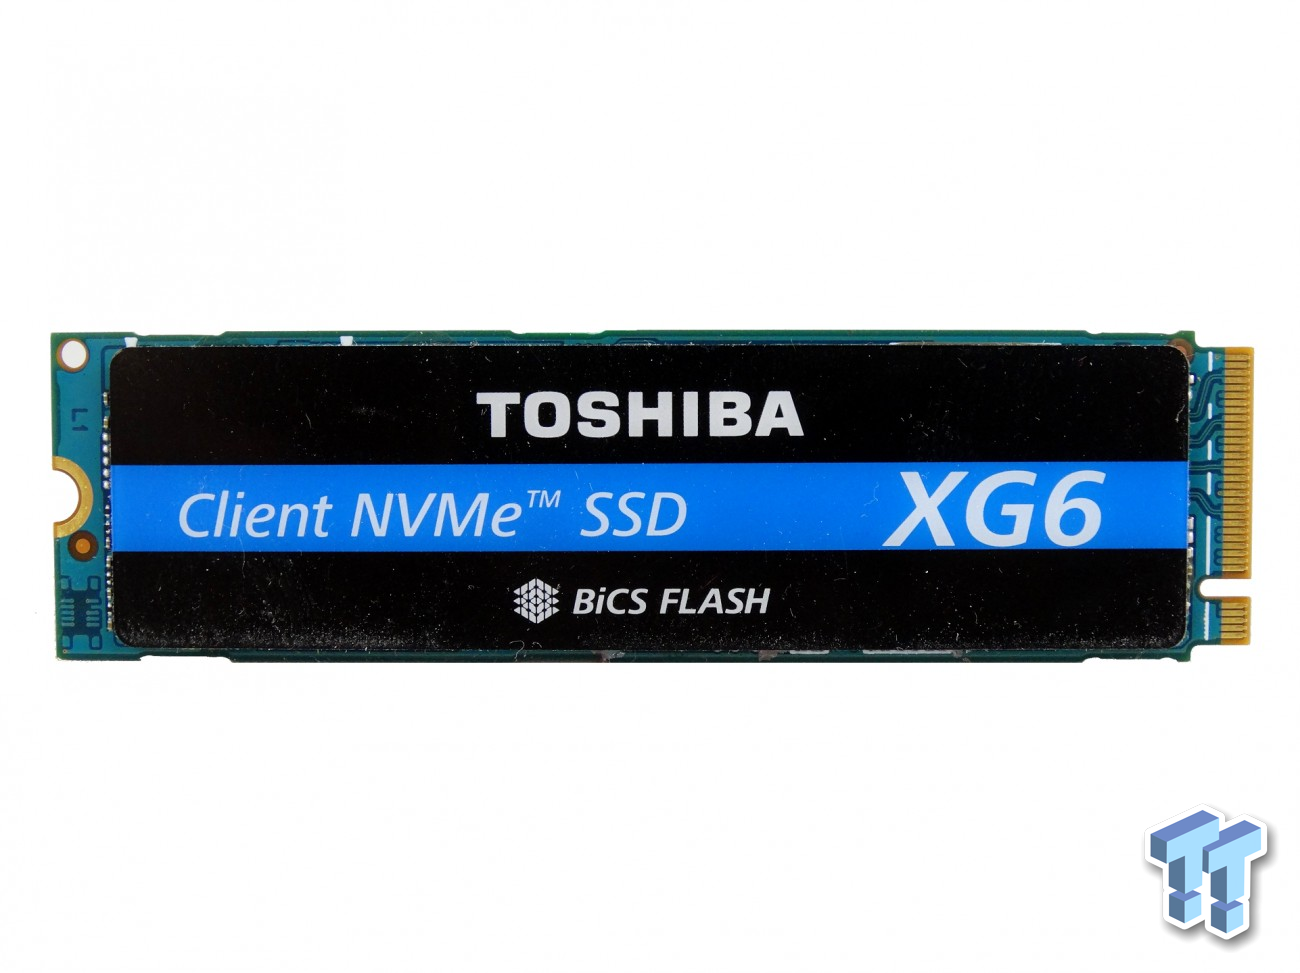 Adventurer Usually Gate Toshiba XG6 SSD Review - System Builders Get 96L First | TweakTown